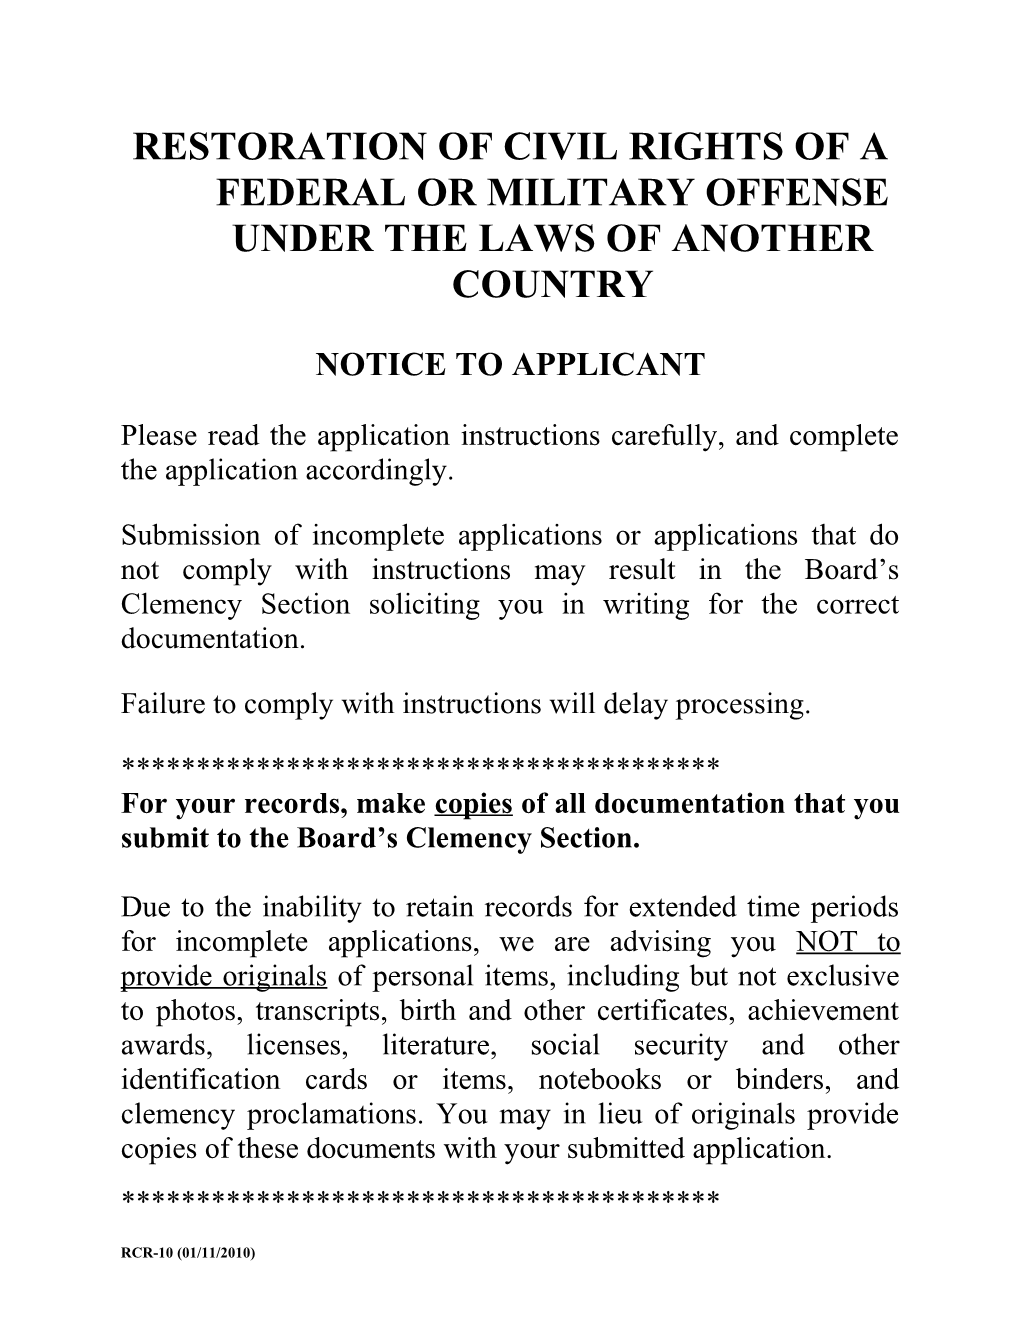 Restoration of Civil Rights of Afederal Or Military Offense Under the Laws of Another Country